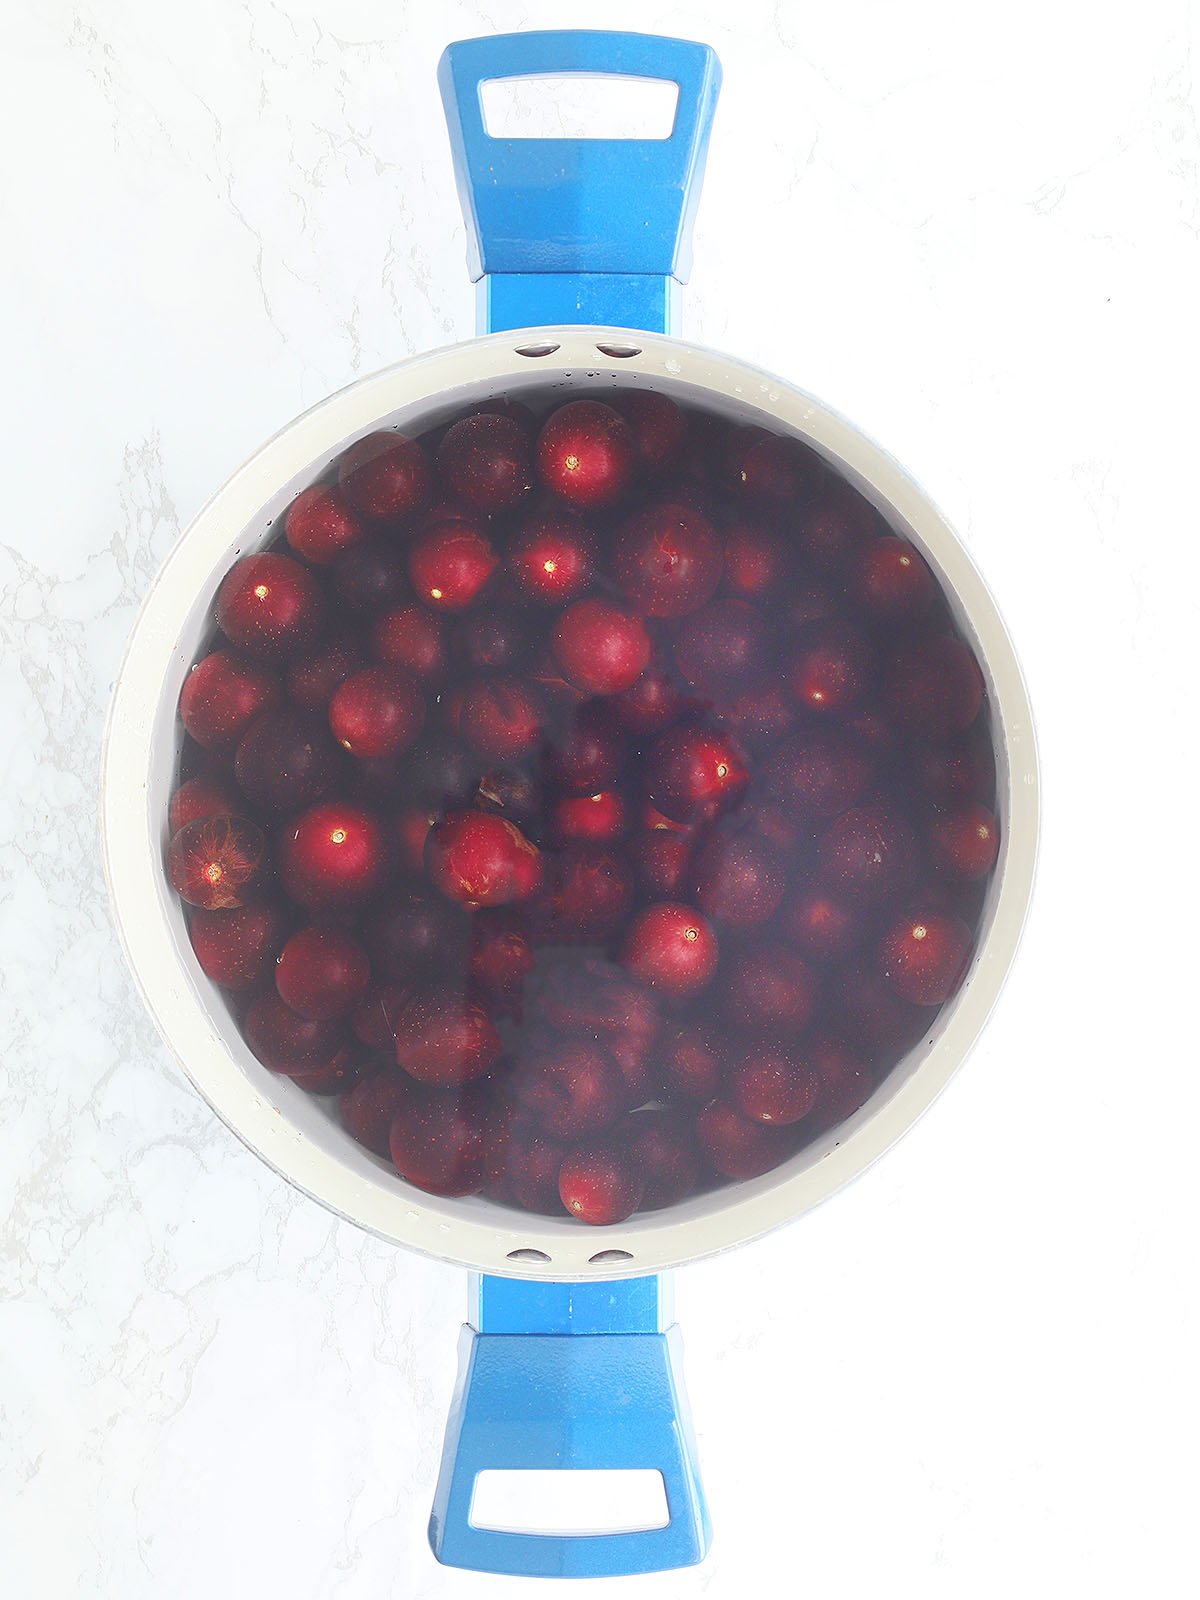 Fresh muscadines covered with water in a large blue stockpot.